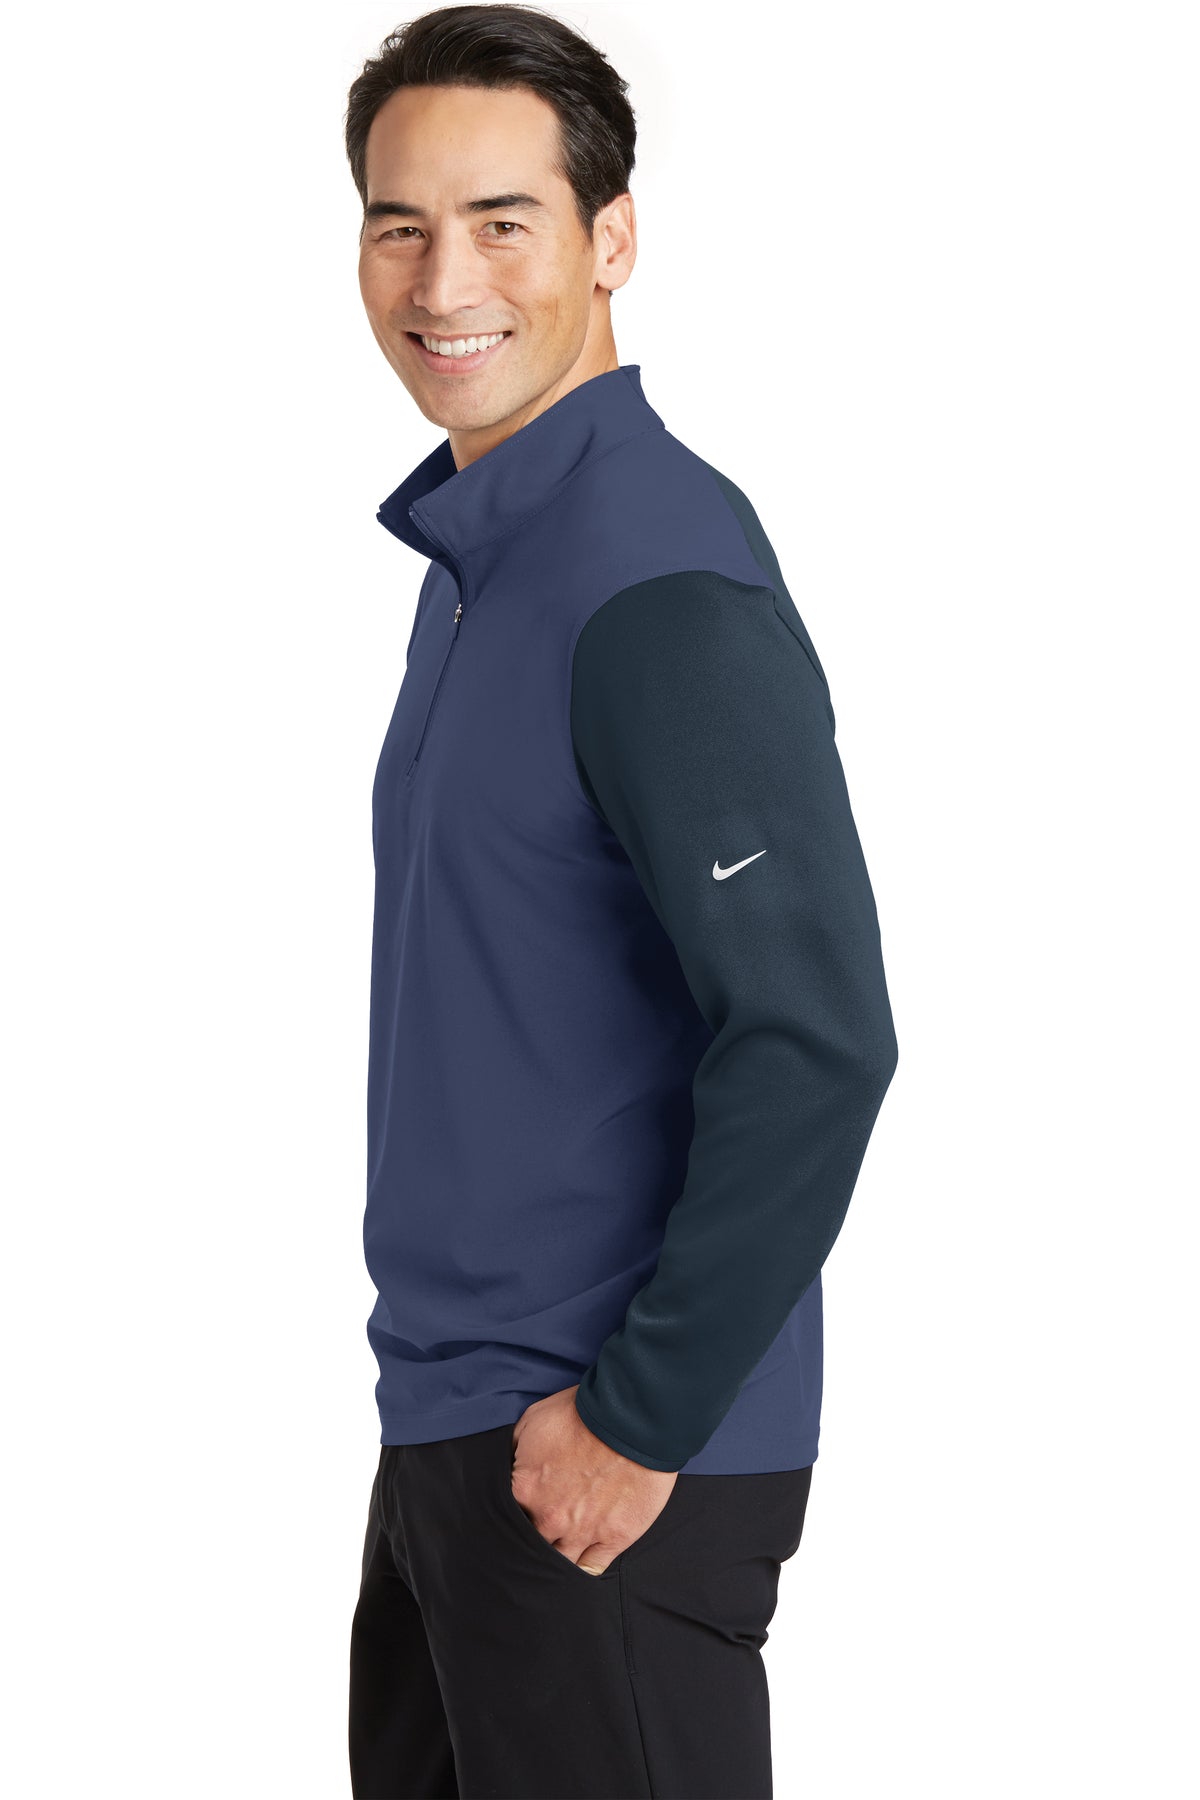 Nike Dri-FIT Fabric Mix 1/2-Zip Cover-Up - 0